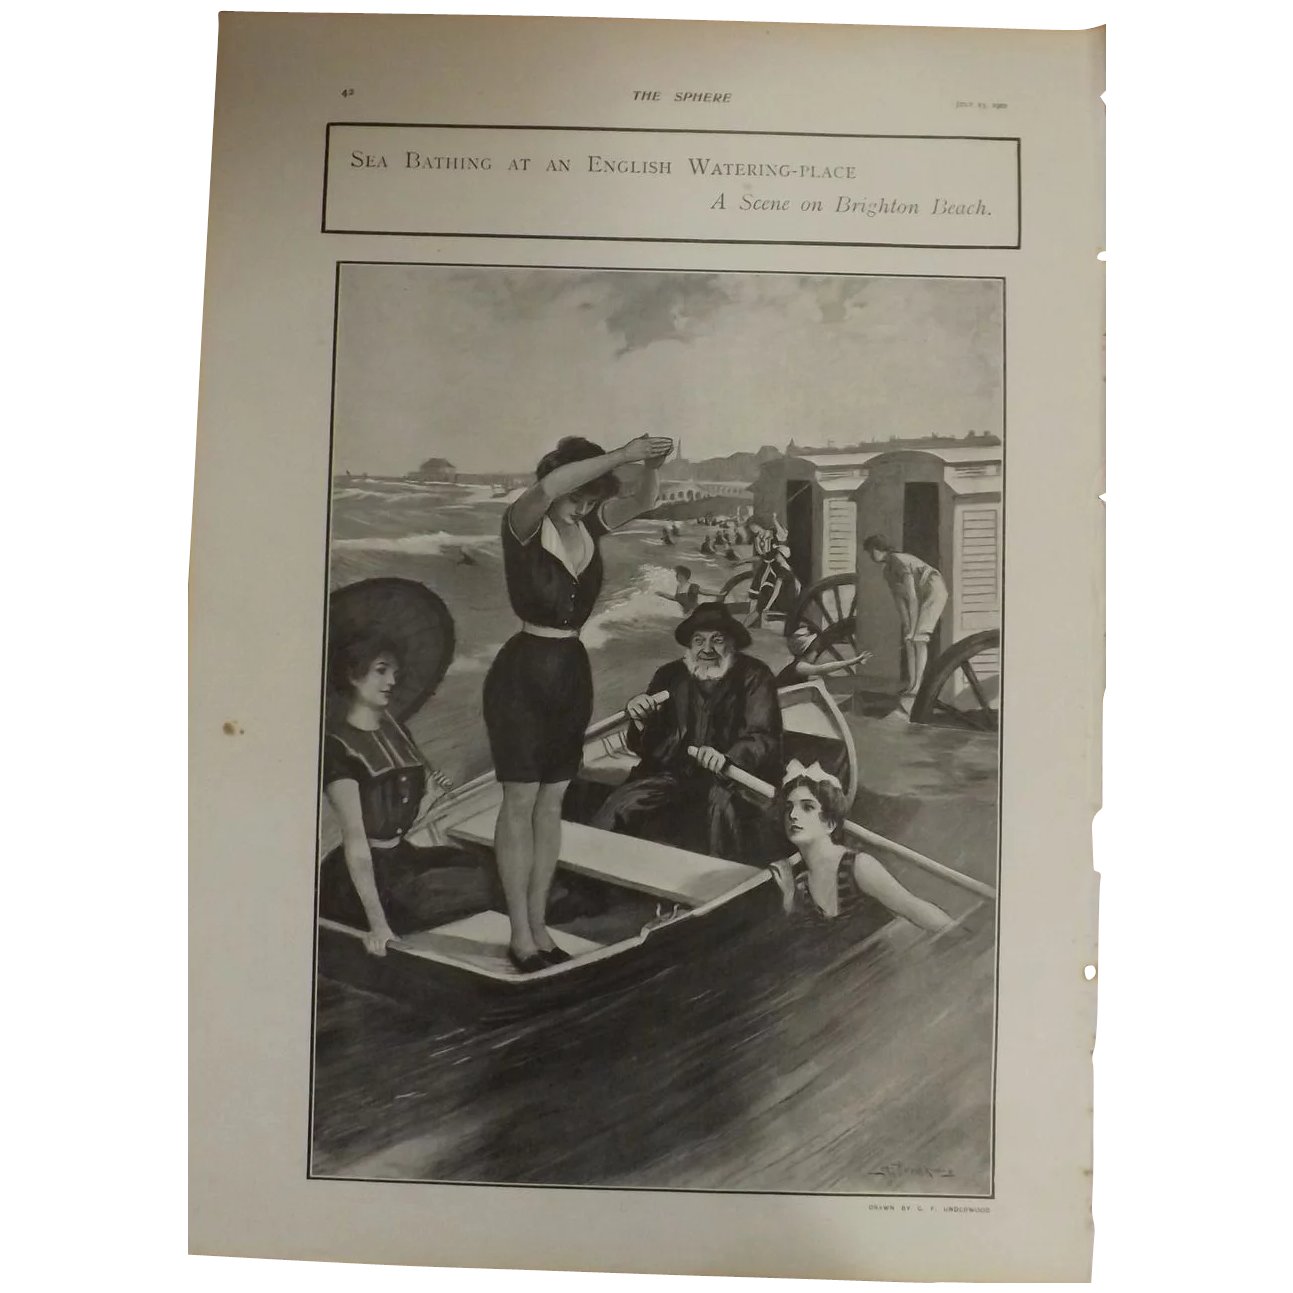 Original Page 'Sea Bathing At An English Watering -Place' - The Sphere JUL. 1901